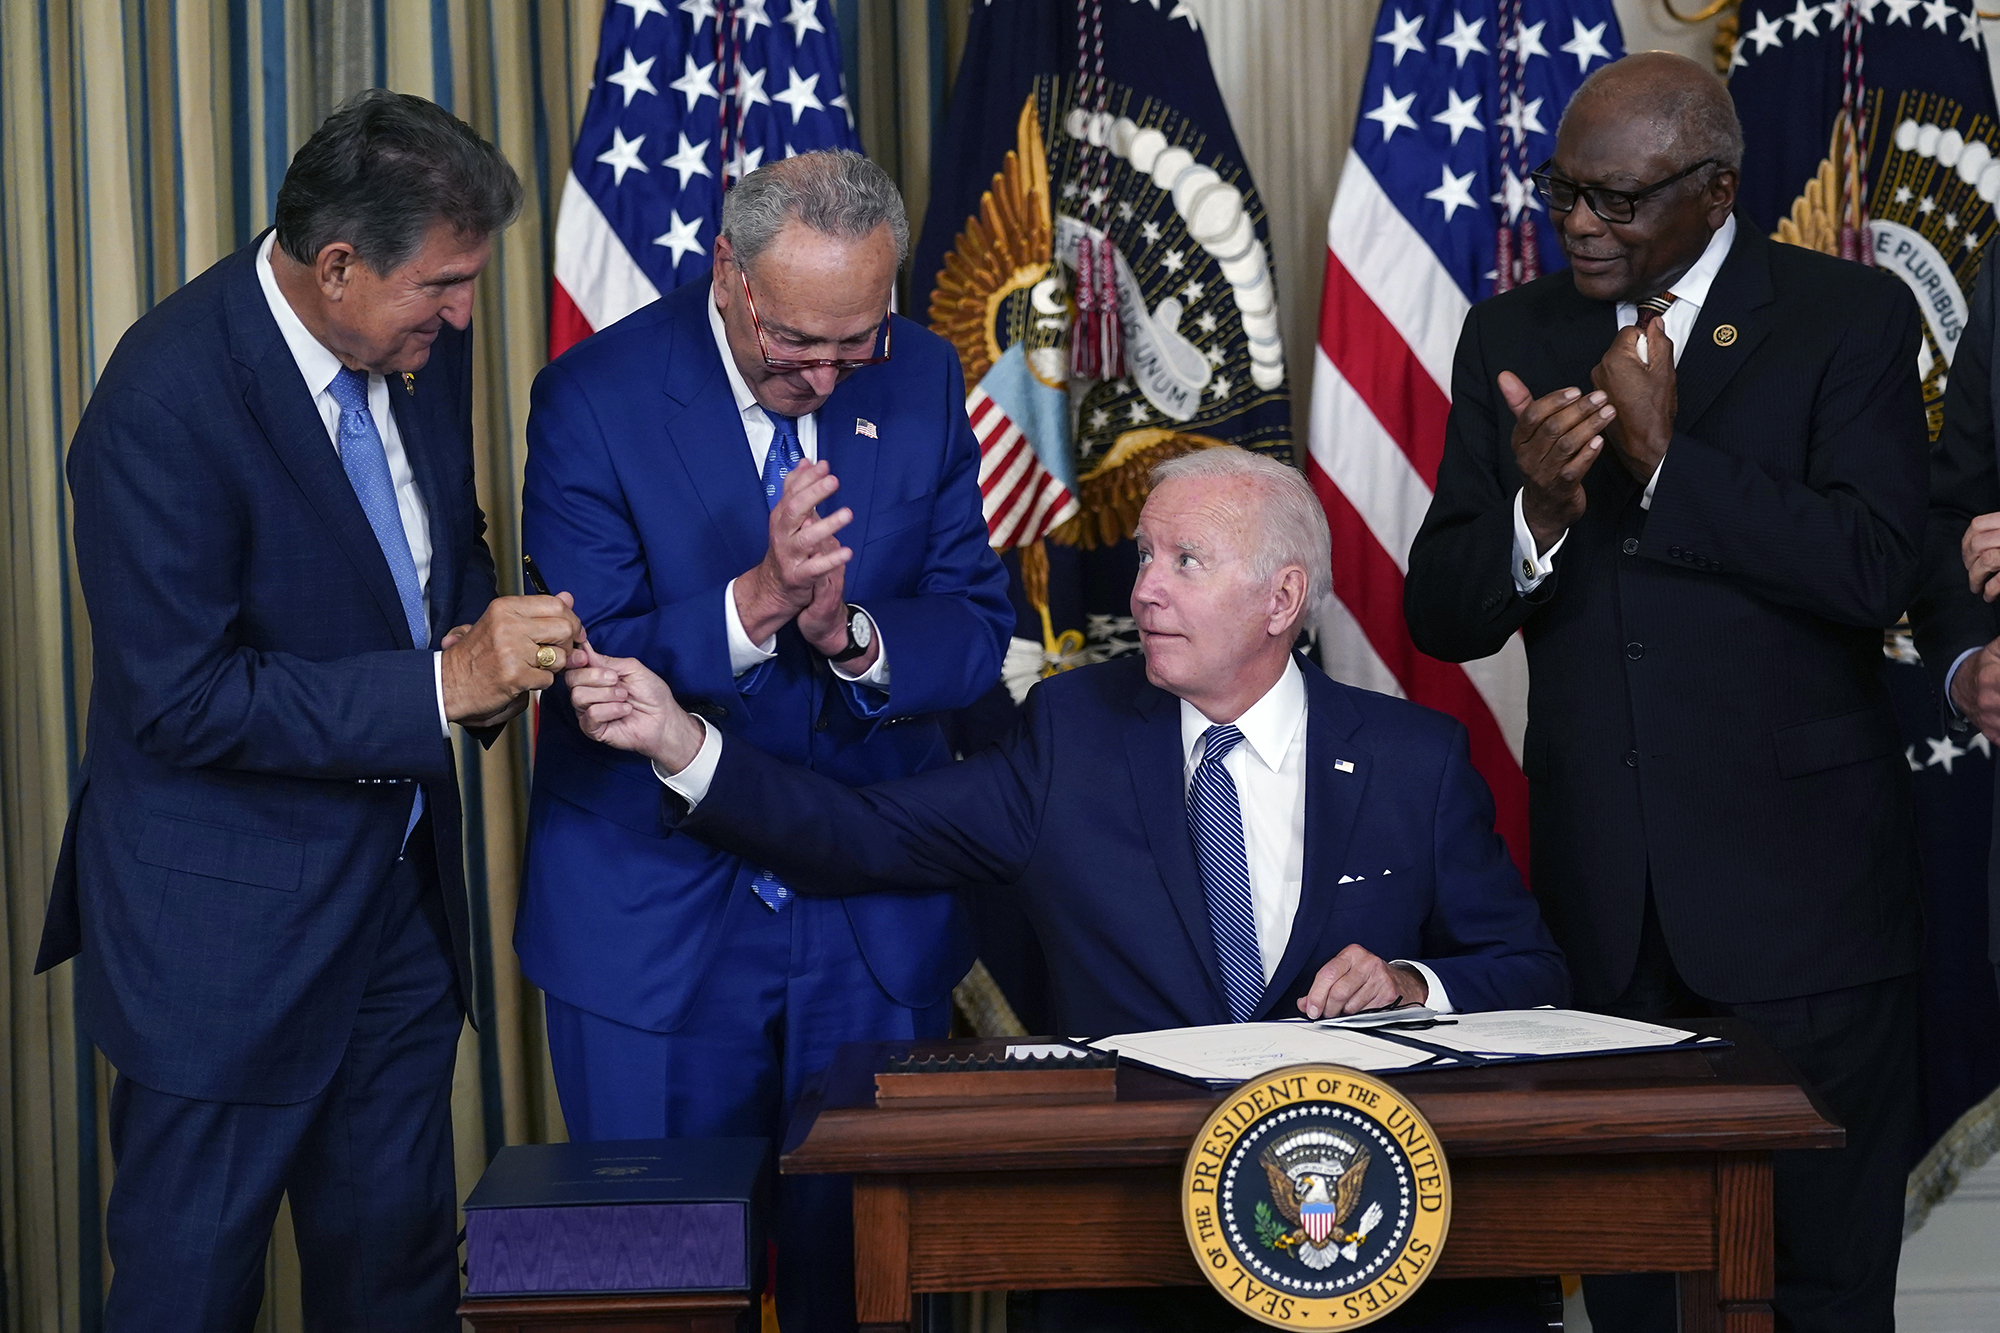 Joe Biden, Chuck Schumer, and Joe Manchin at a bill signing. Biden is sitting at a desk with the Presidential Seal. Schumer and Manchin are standing behind him. Behind all three are two American flags and a third other flag.